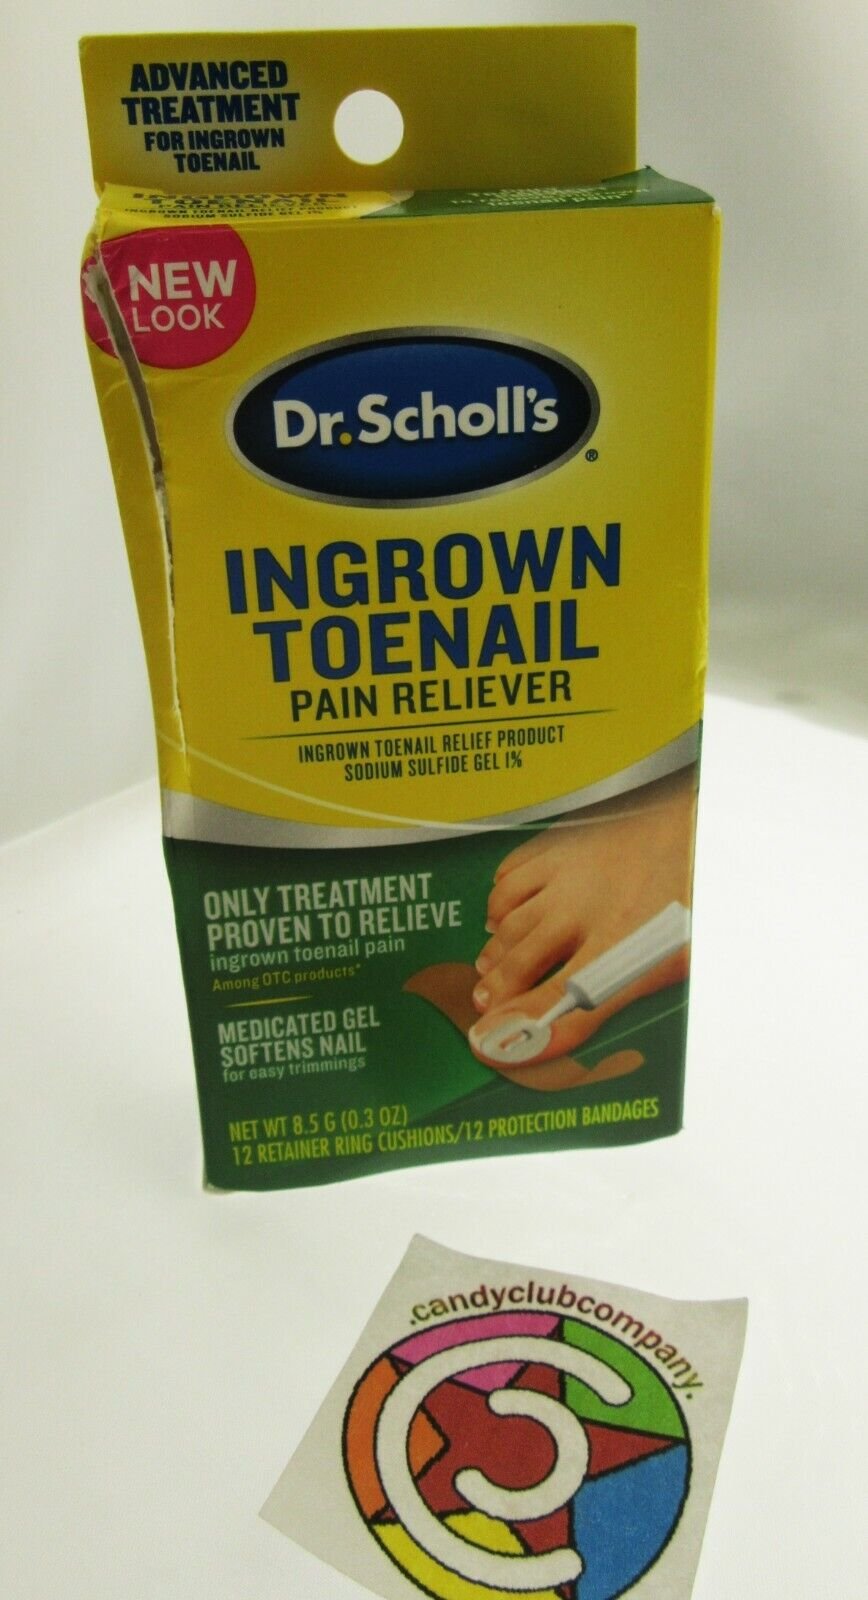 Dr Scholl's Ingrown Toenail Pain Reliever Sodium Sulfide Gel Cushions & Bandages